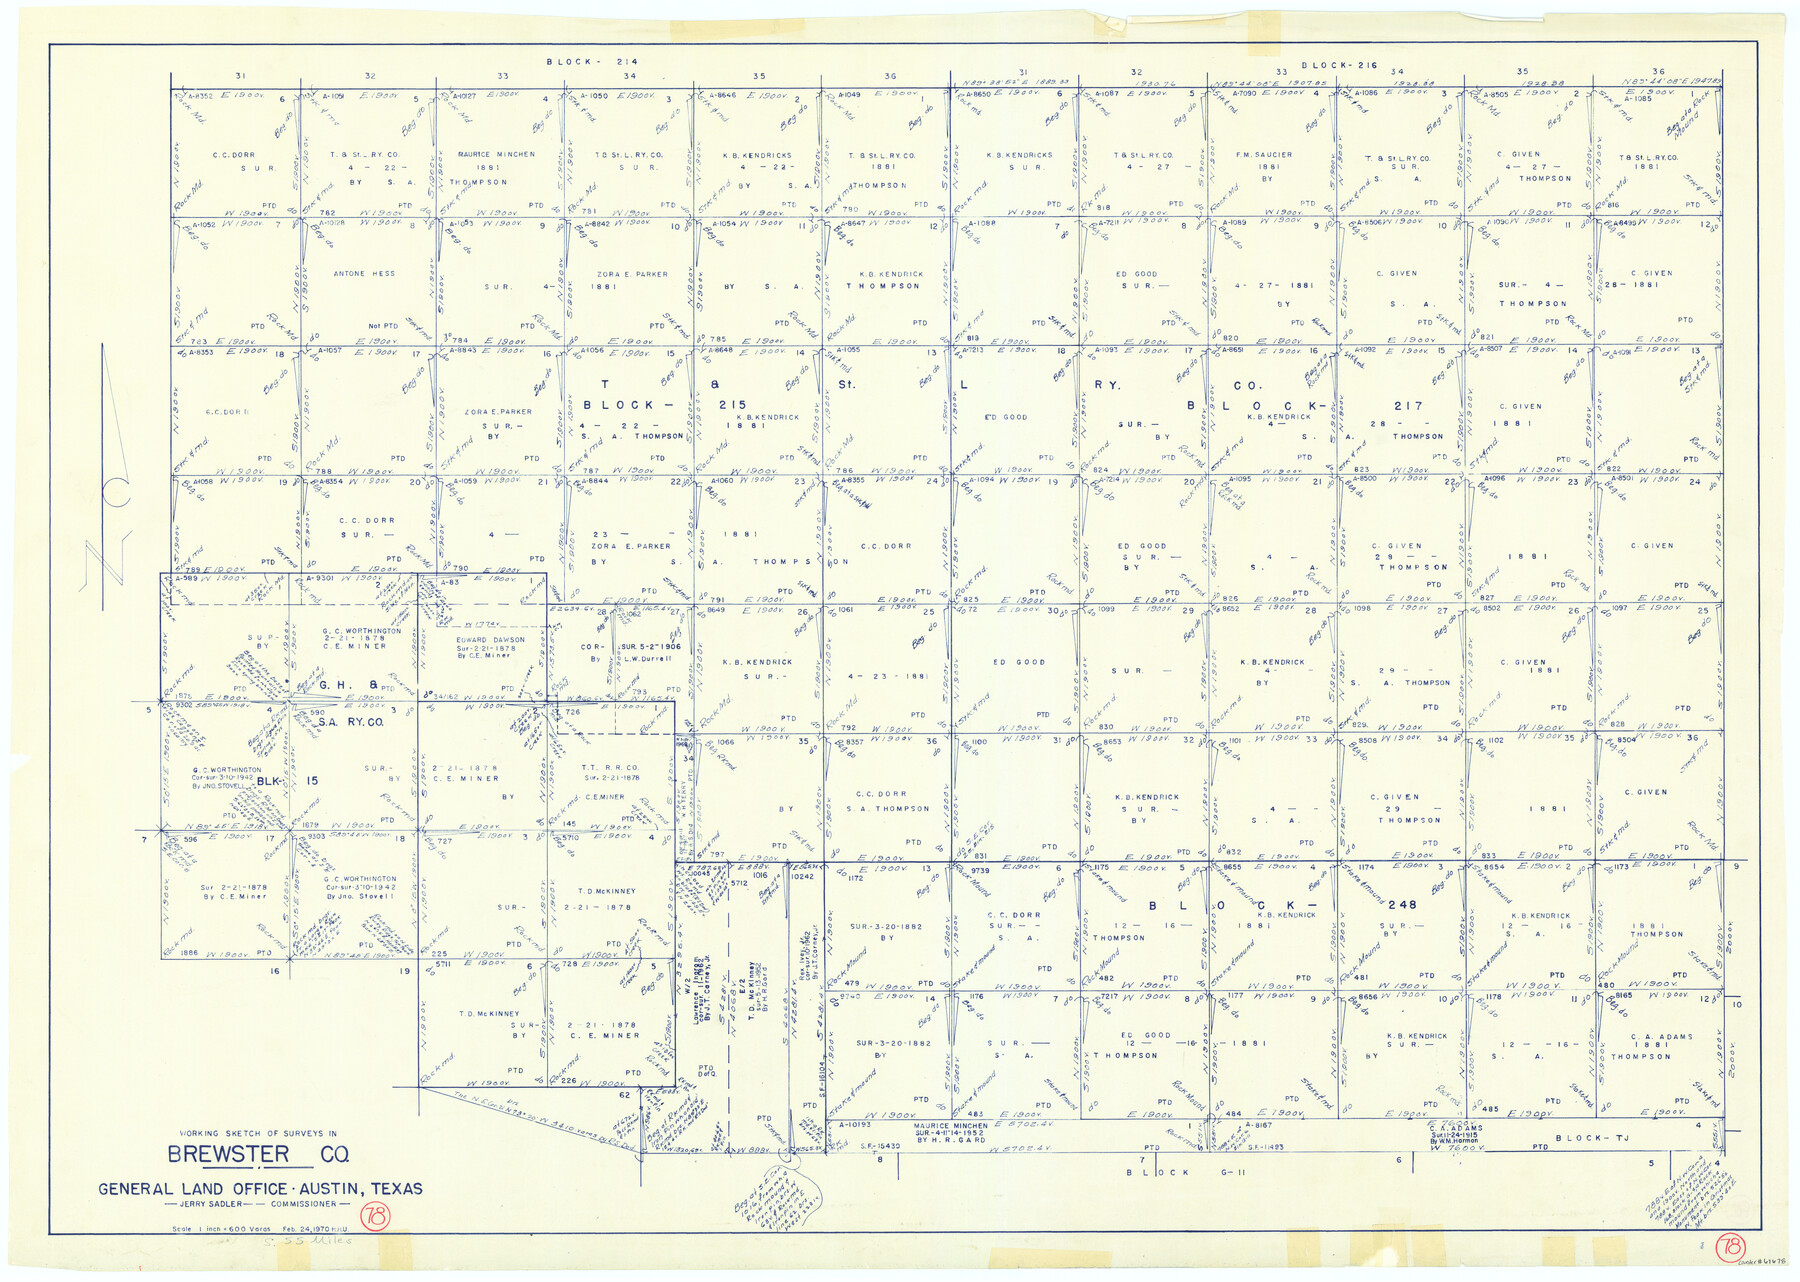 67678, Brewster County Working Sketch 78, General Map Collection